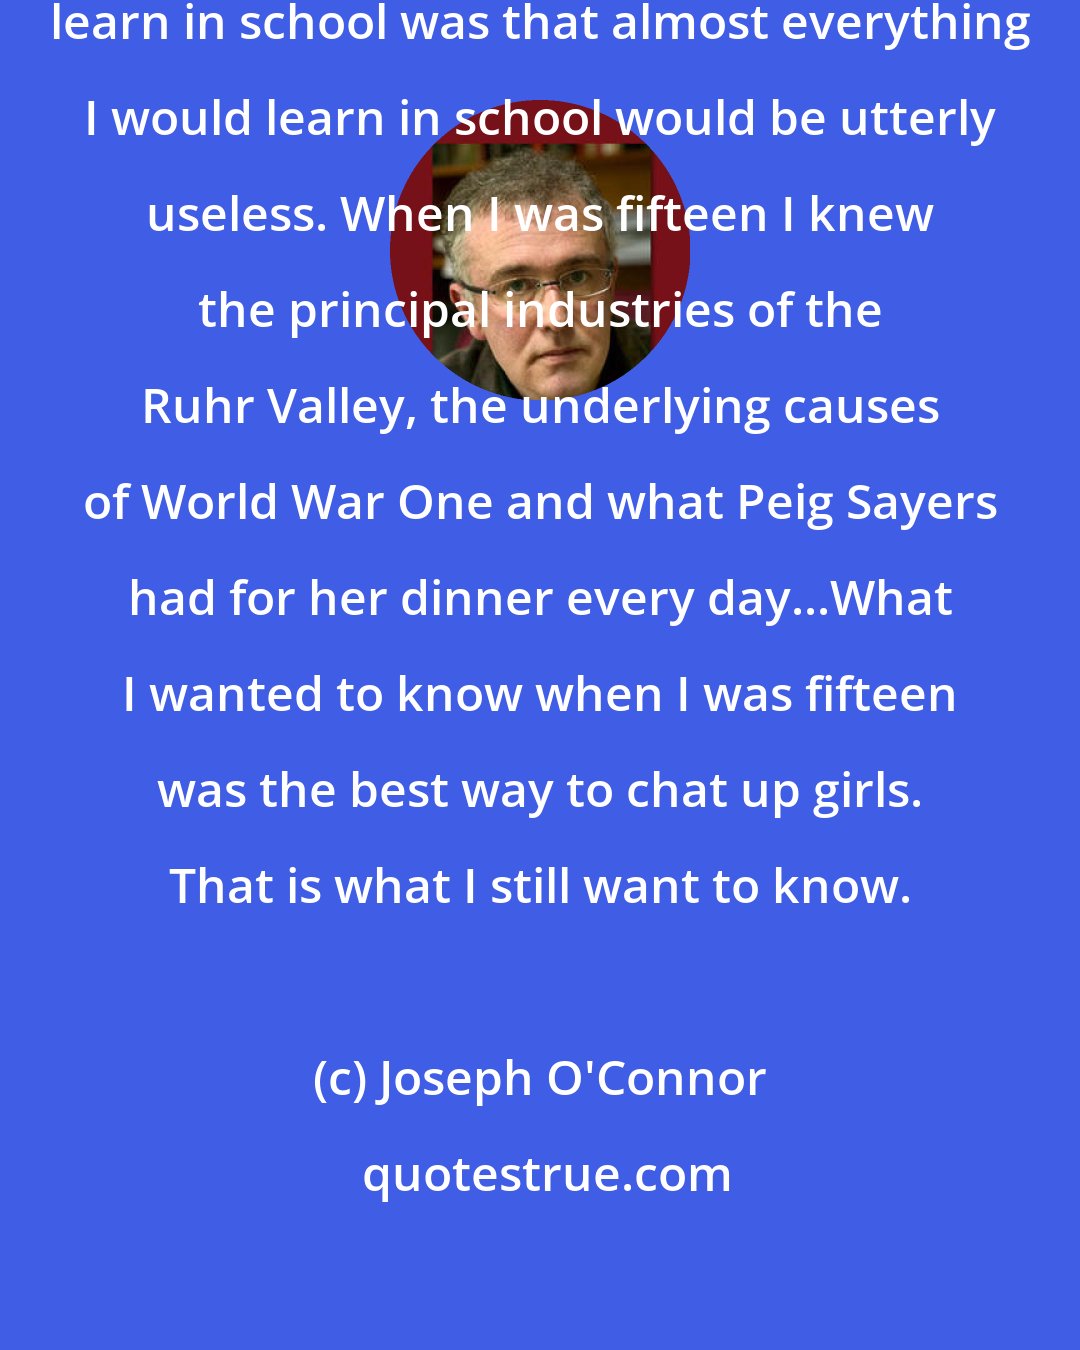 Joseph O'Connor: The most important thing I would learn in school was that almost everything I would learn in school would be utterly useless. When I was fifteen I knew the principal industries of the Ruhr Valley, the underlying causes of World War One and what Peig Sayers had for her dinner every day...What I wanted to know when I was fifteen was the best way to chat up girls. That is what I still want to know.